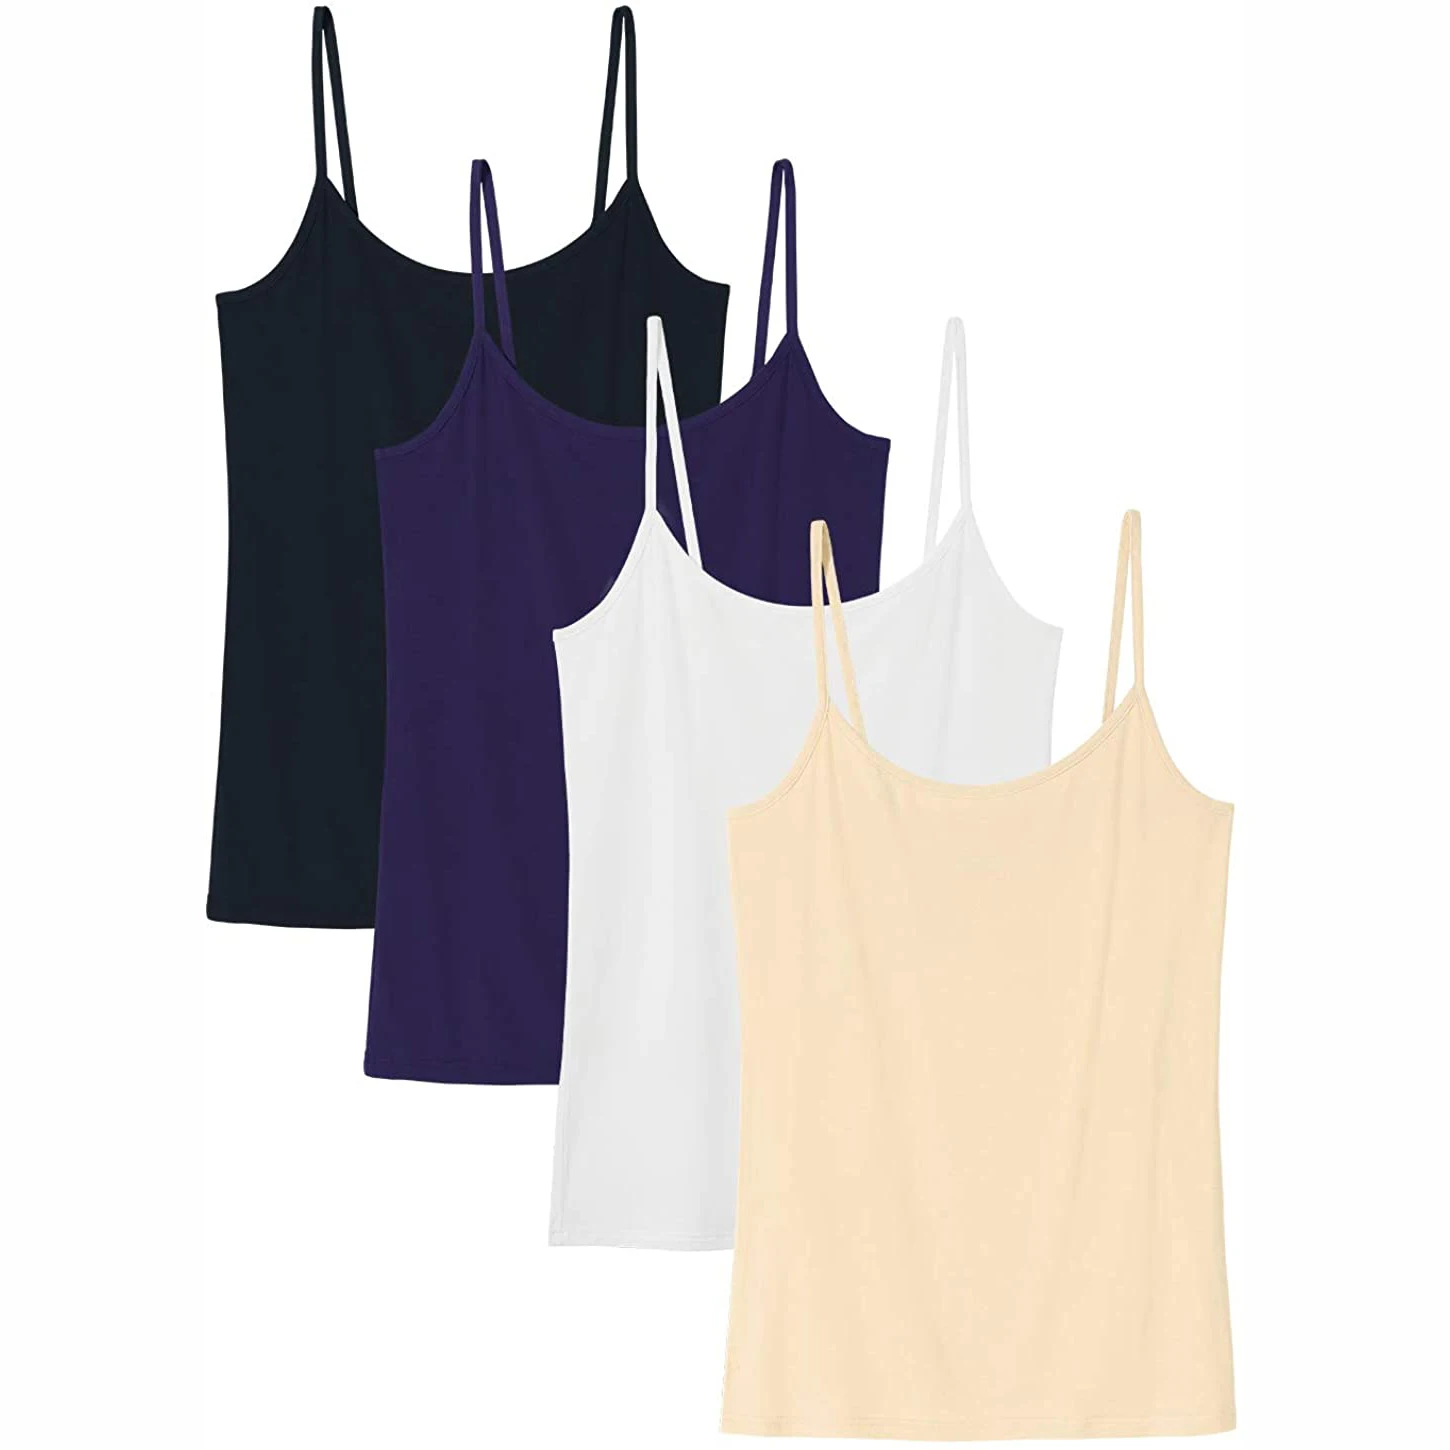 Summer Women Camisoles Crop Top Sleeveless Shirt Lady Bralette Tops Strap Home Sleepwear Camisole Base Vest Tops fit for 35-70kg